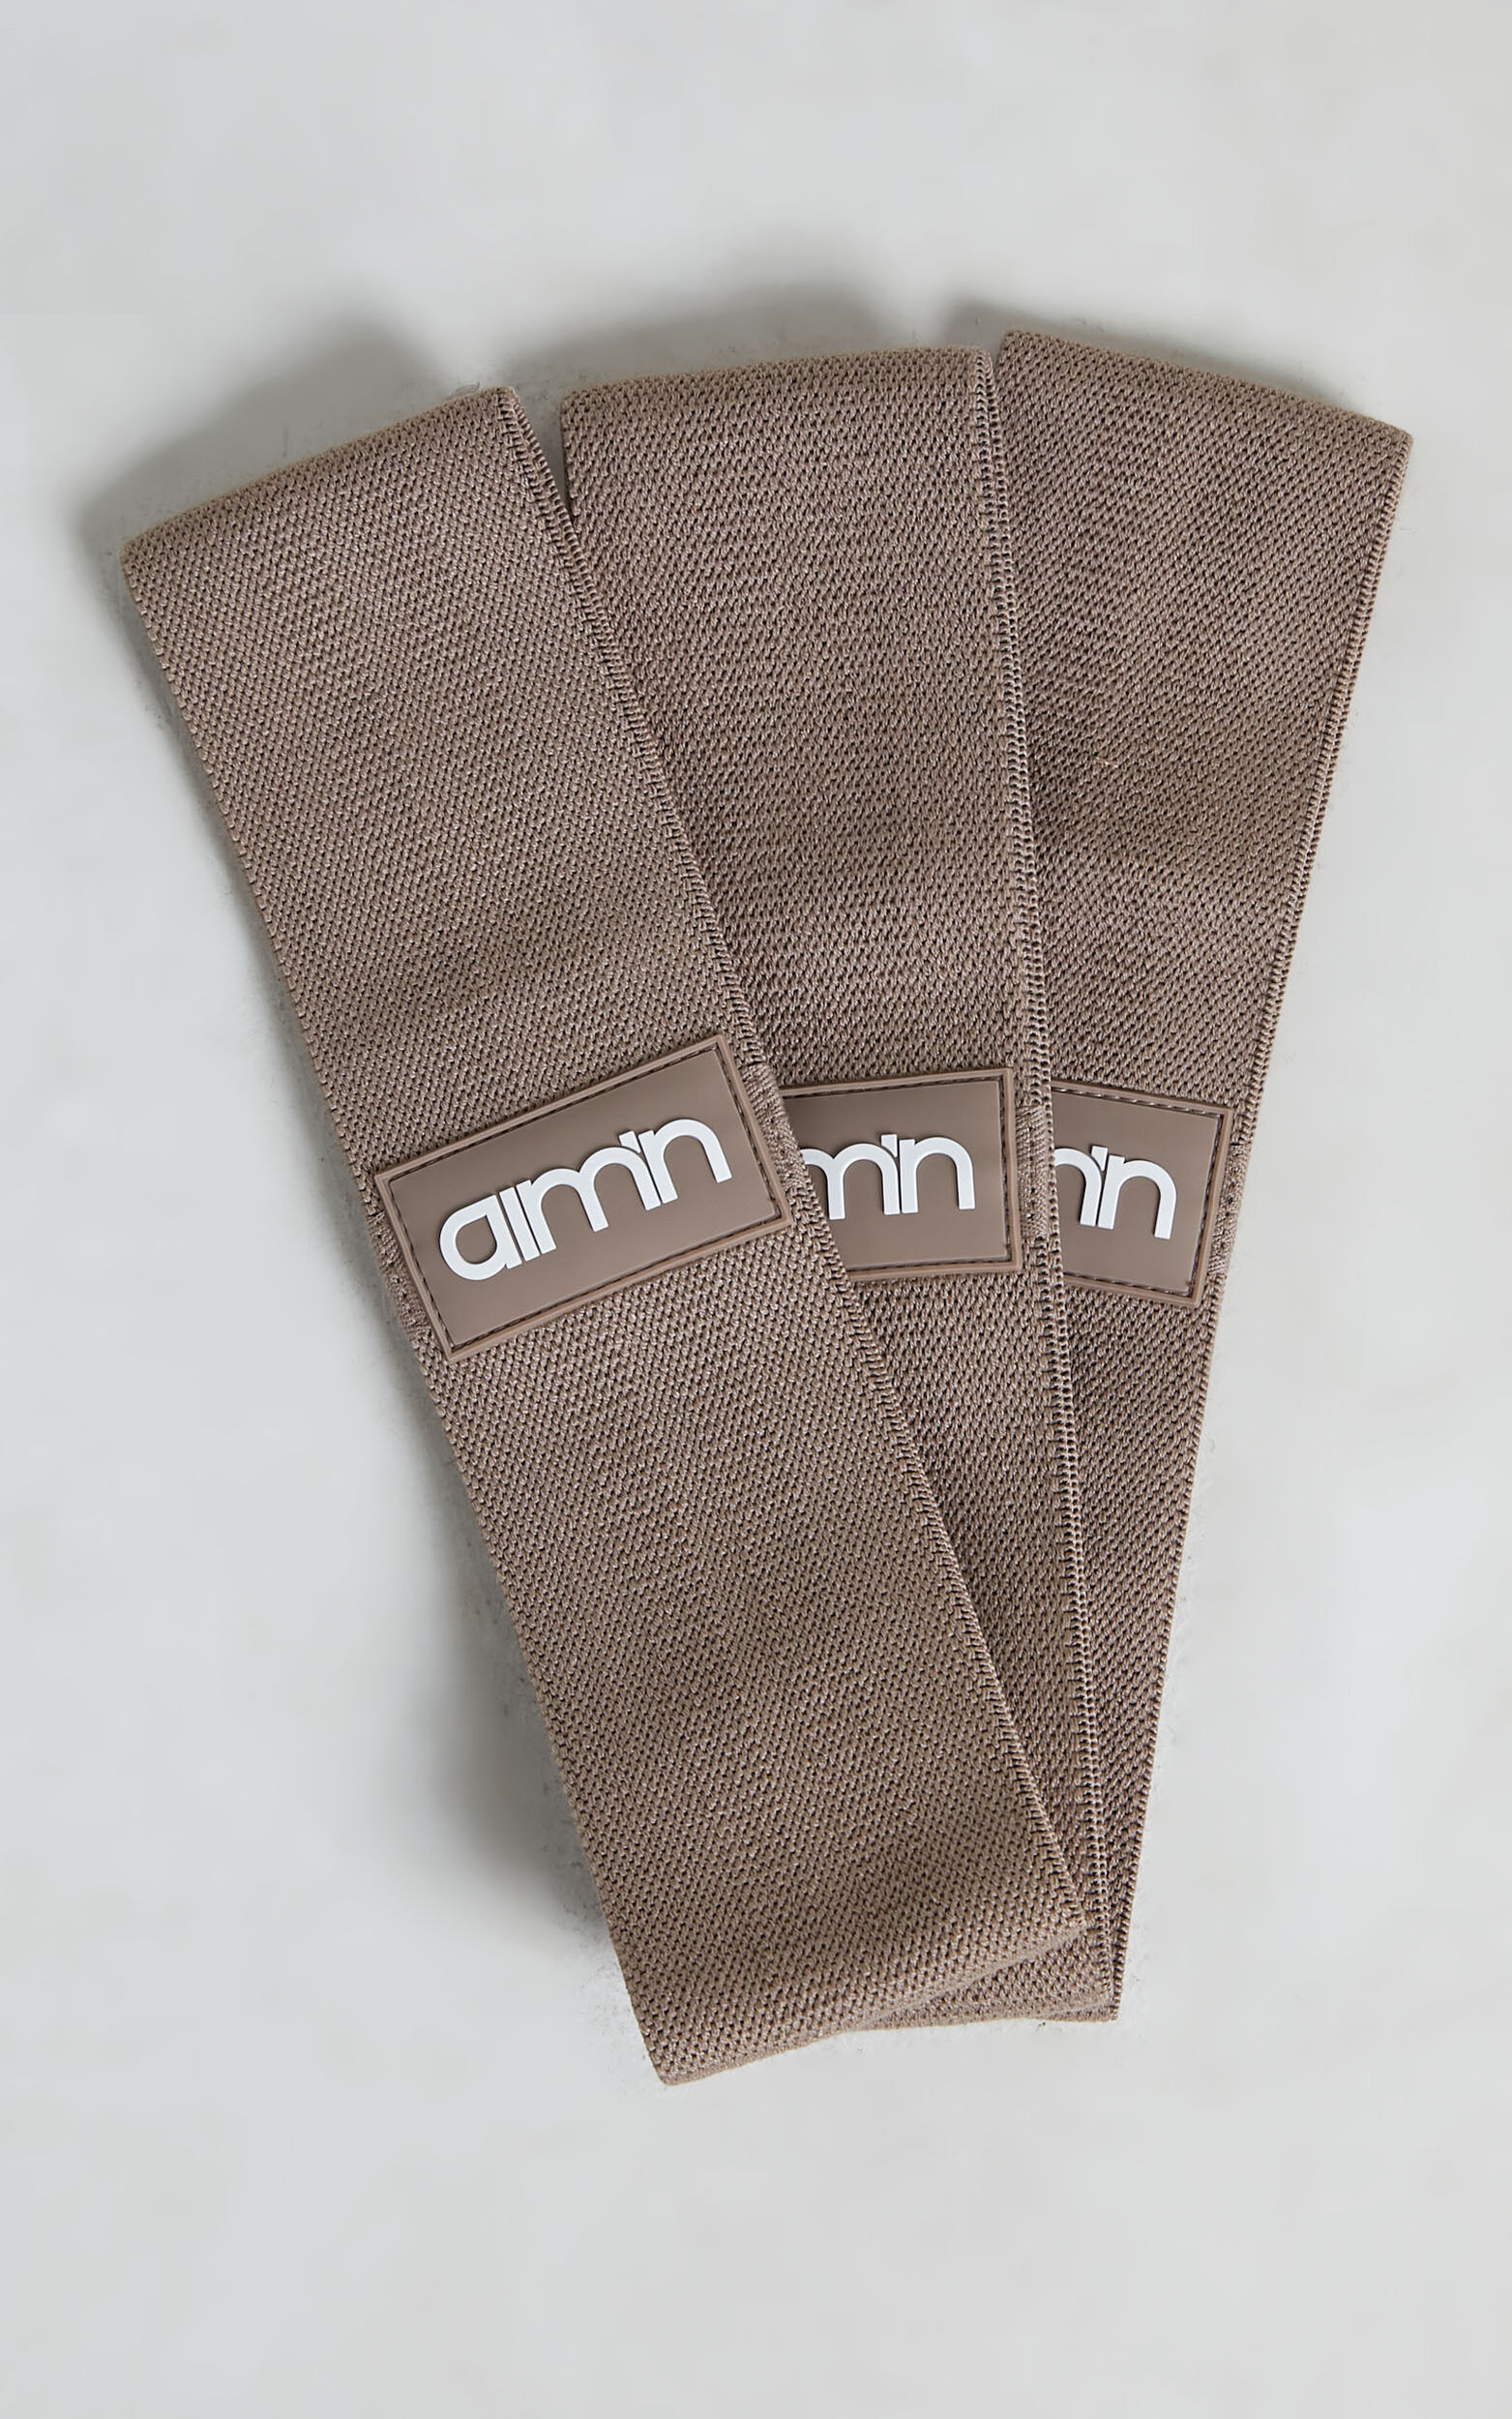 Aim'n - FABRIC RESISTANCE BANDS in Espresso - OneSize, BRN1, super-hi-res image number null